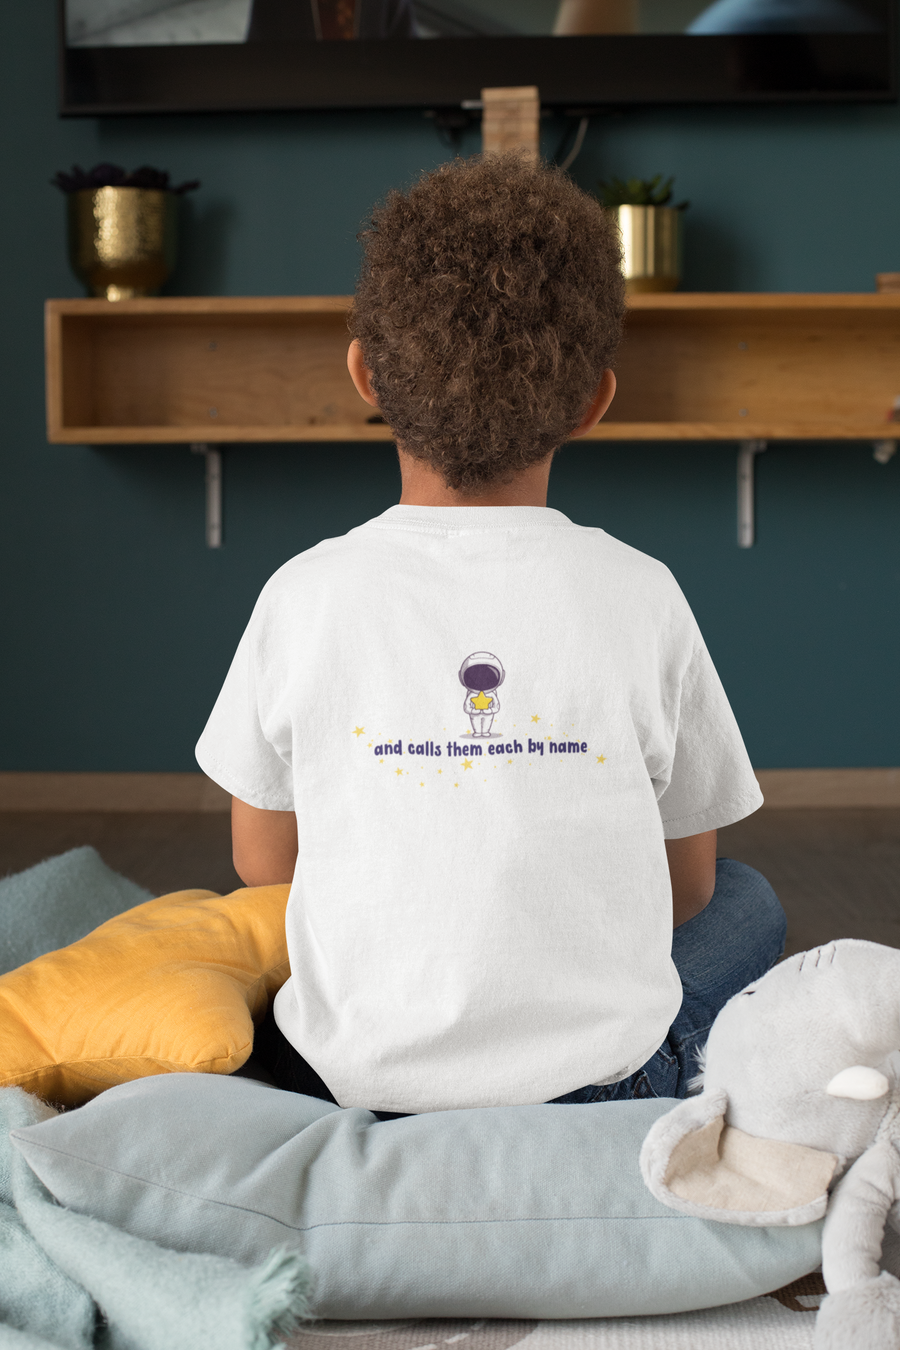 Young boy sitting on cushion with back of white kids Christian tshirt that says "and calls them each by name" below an astronaut holding a star.